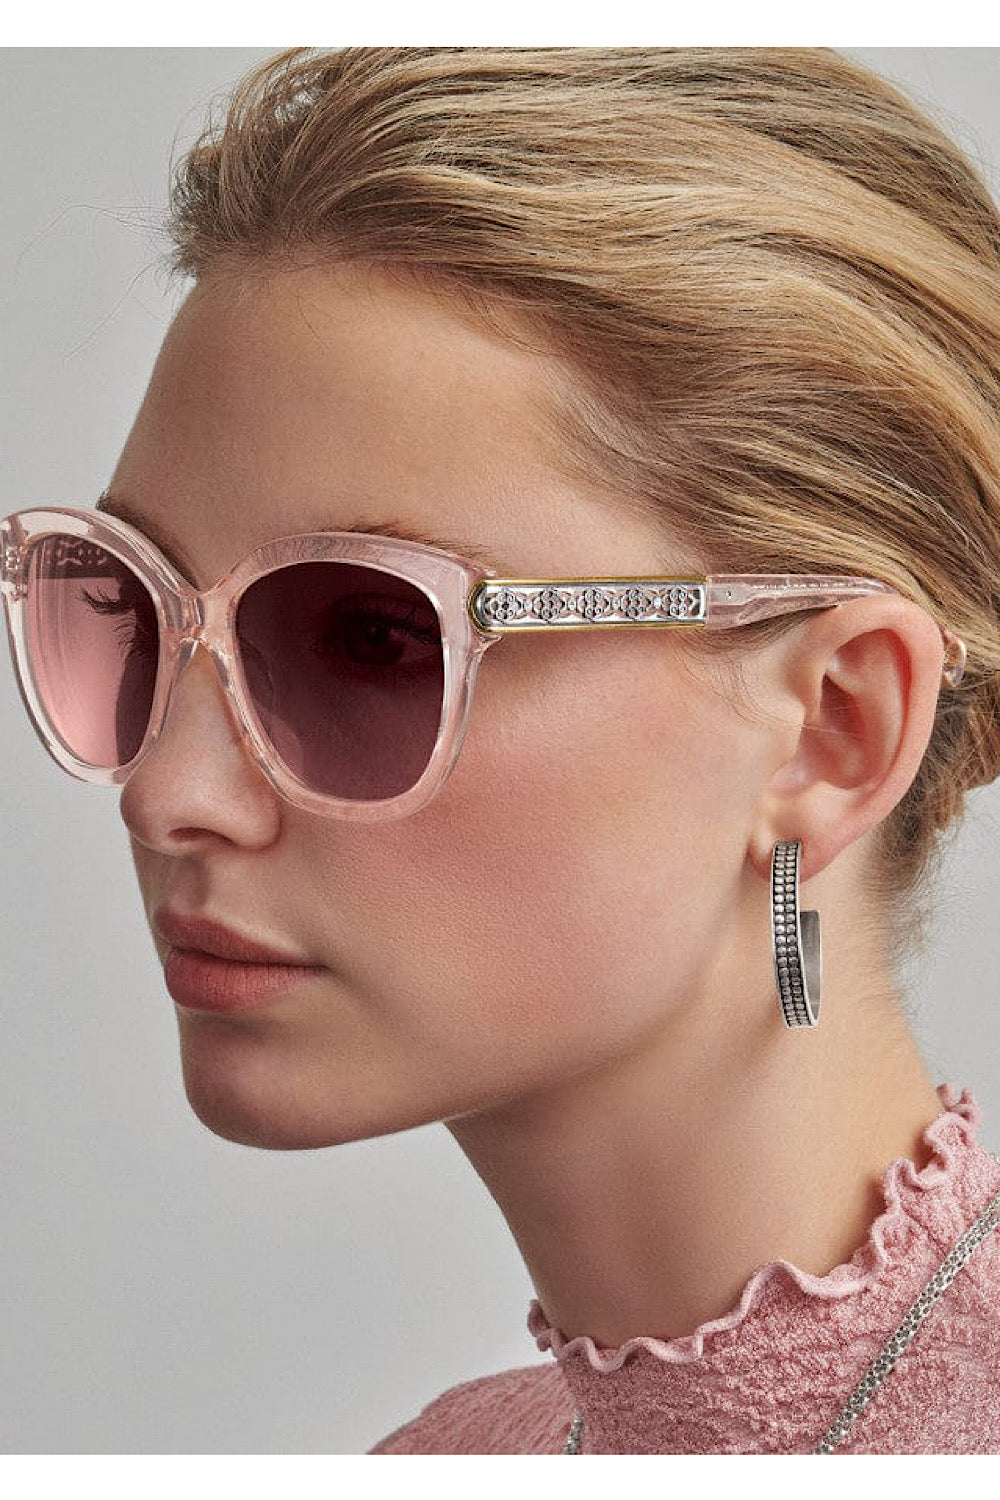 INTRIGUE SUNGLASSES IN ROSEWATER